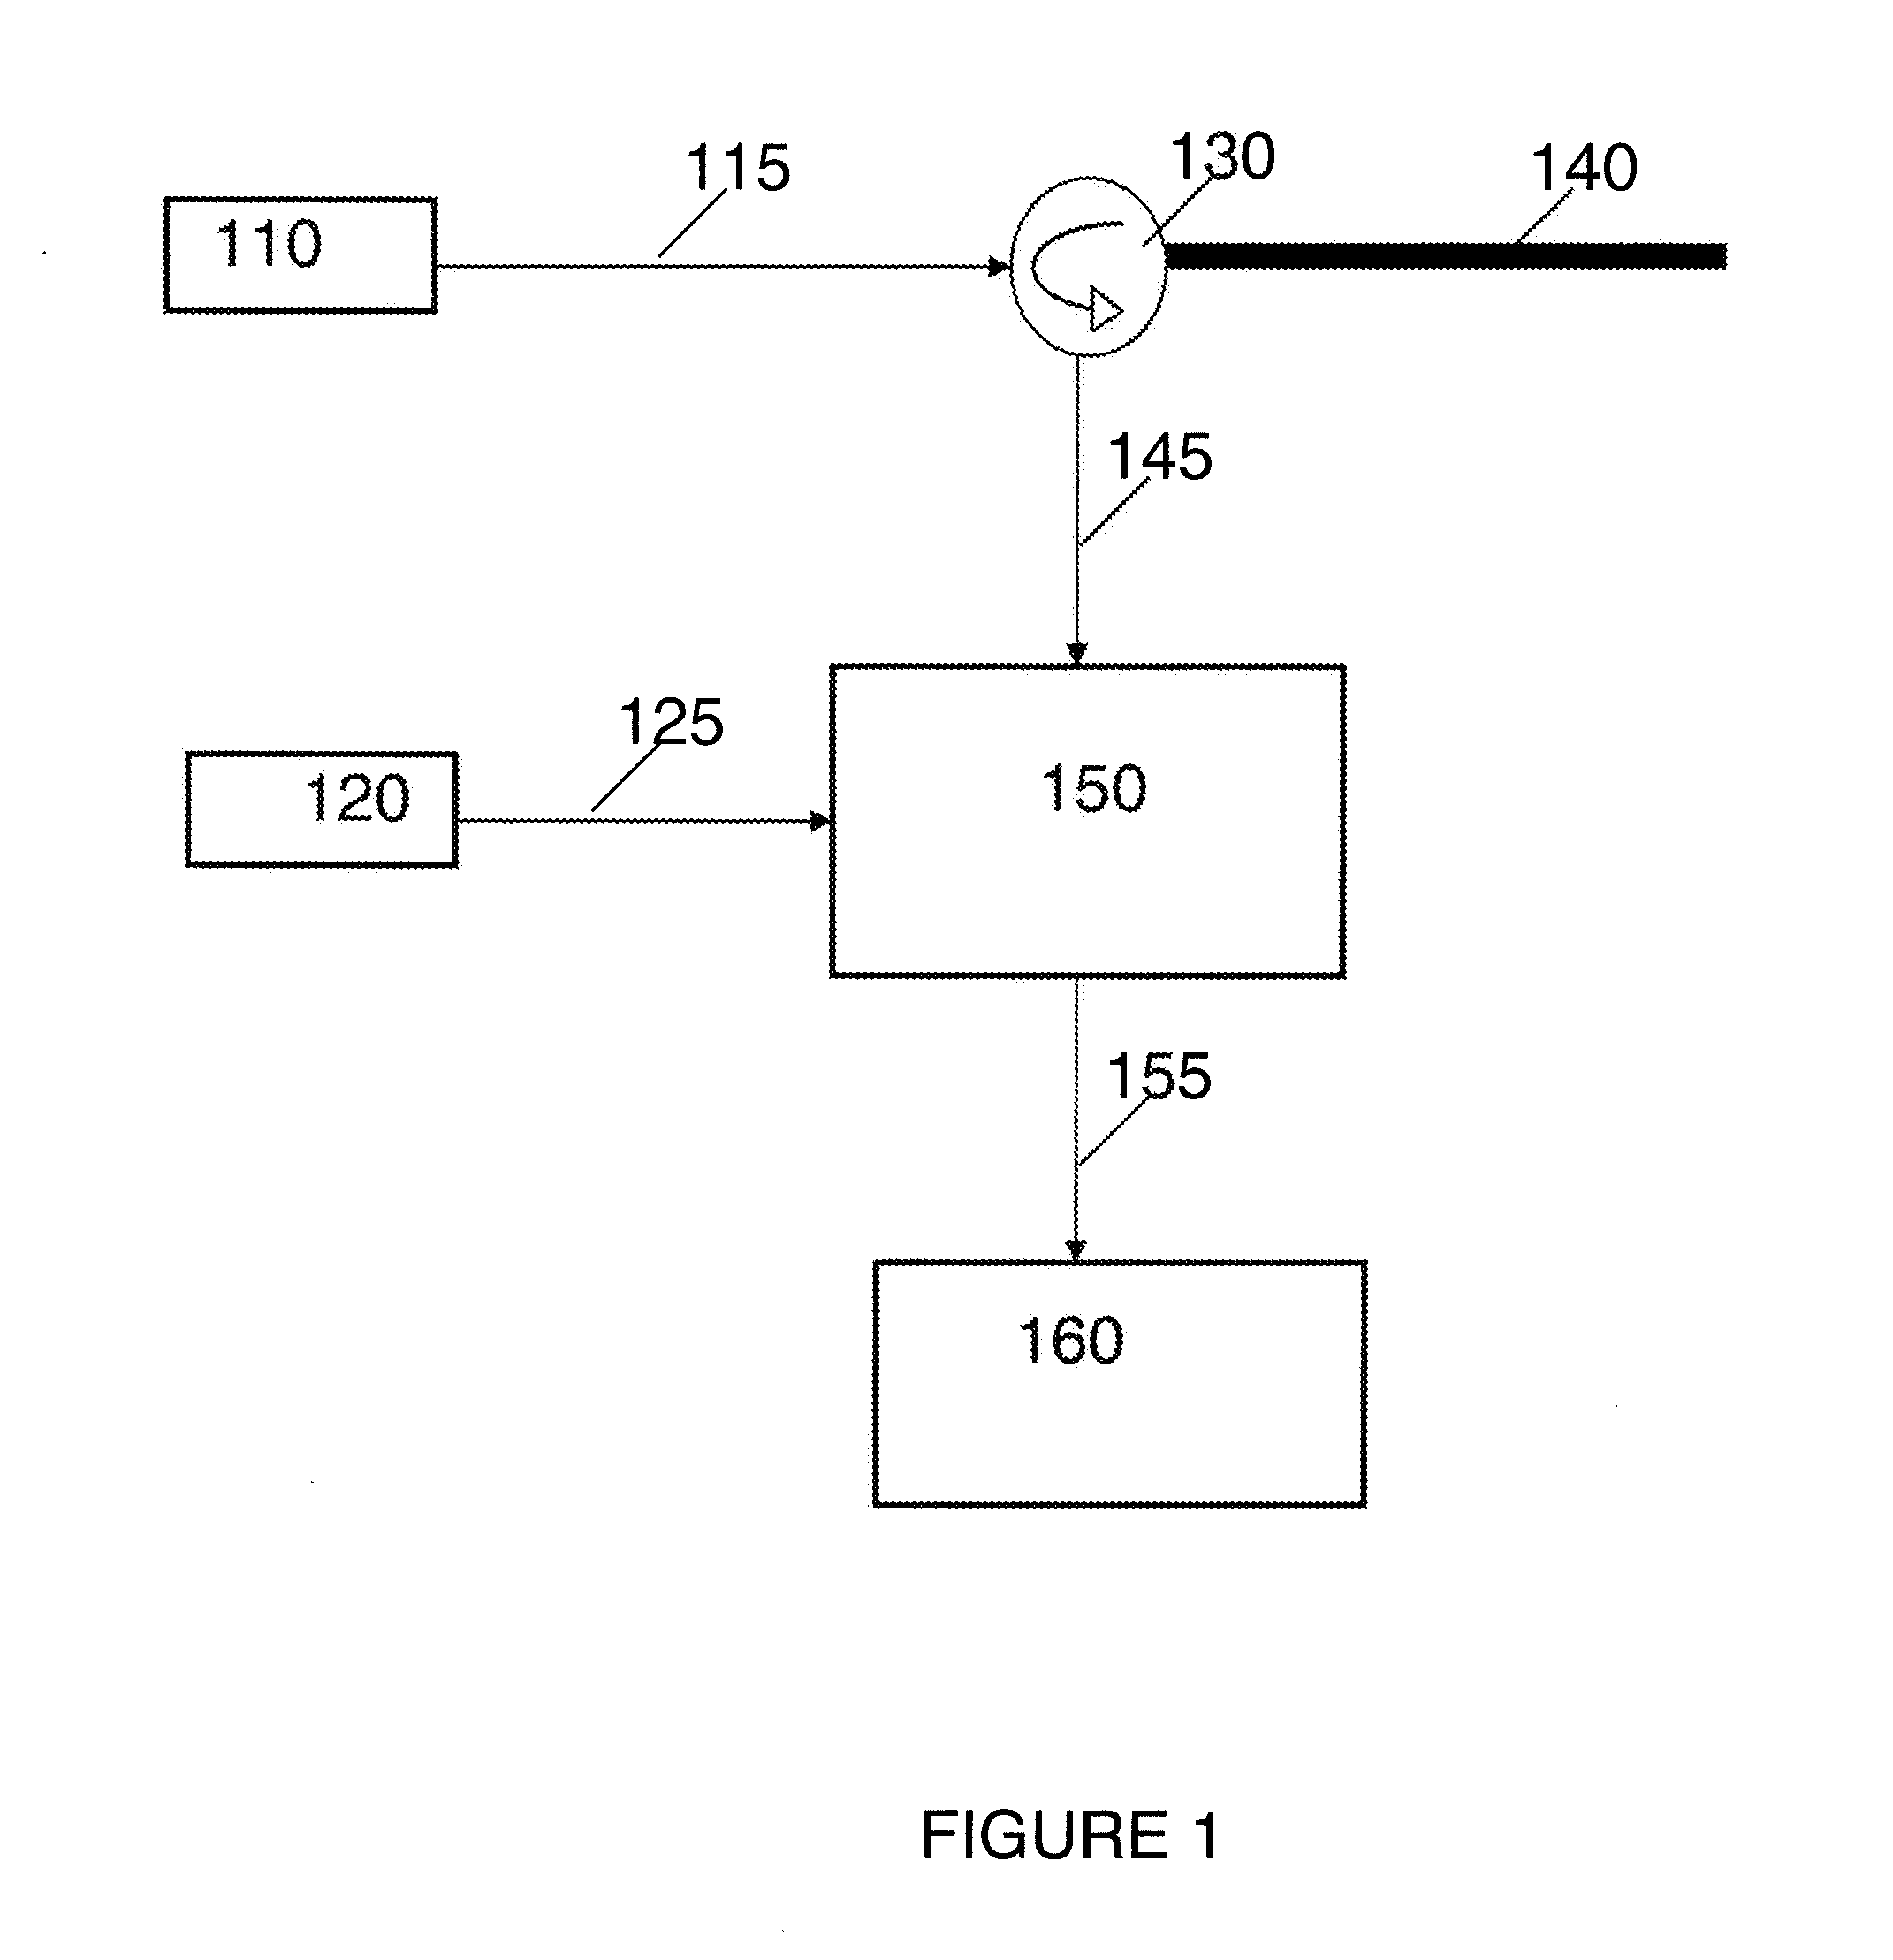 System and method for using coherently locked optical oscillator with brillouin frequency offset for fiber-optics-based distributed temperature and strain sensing applications